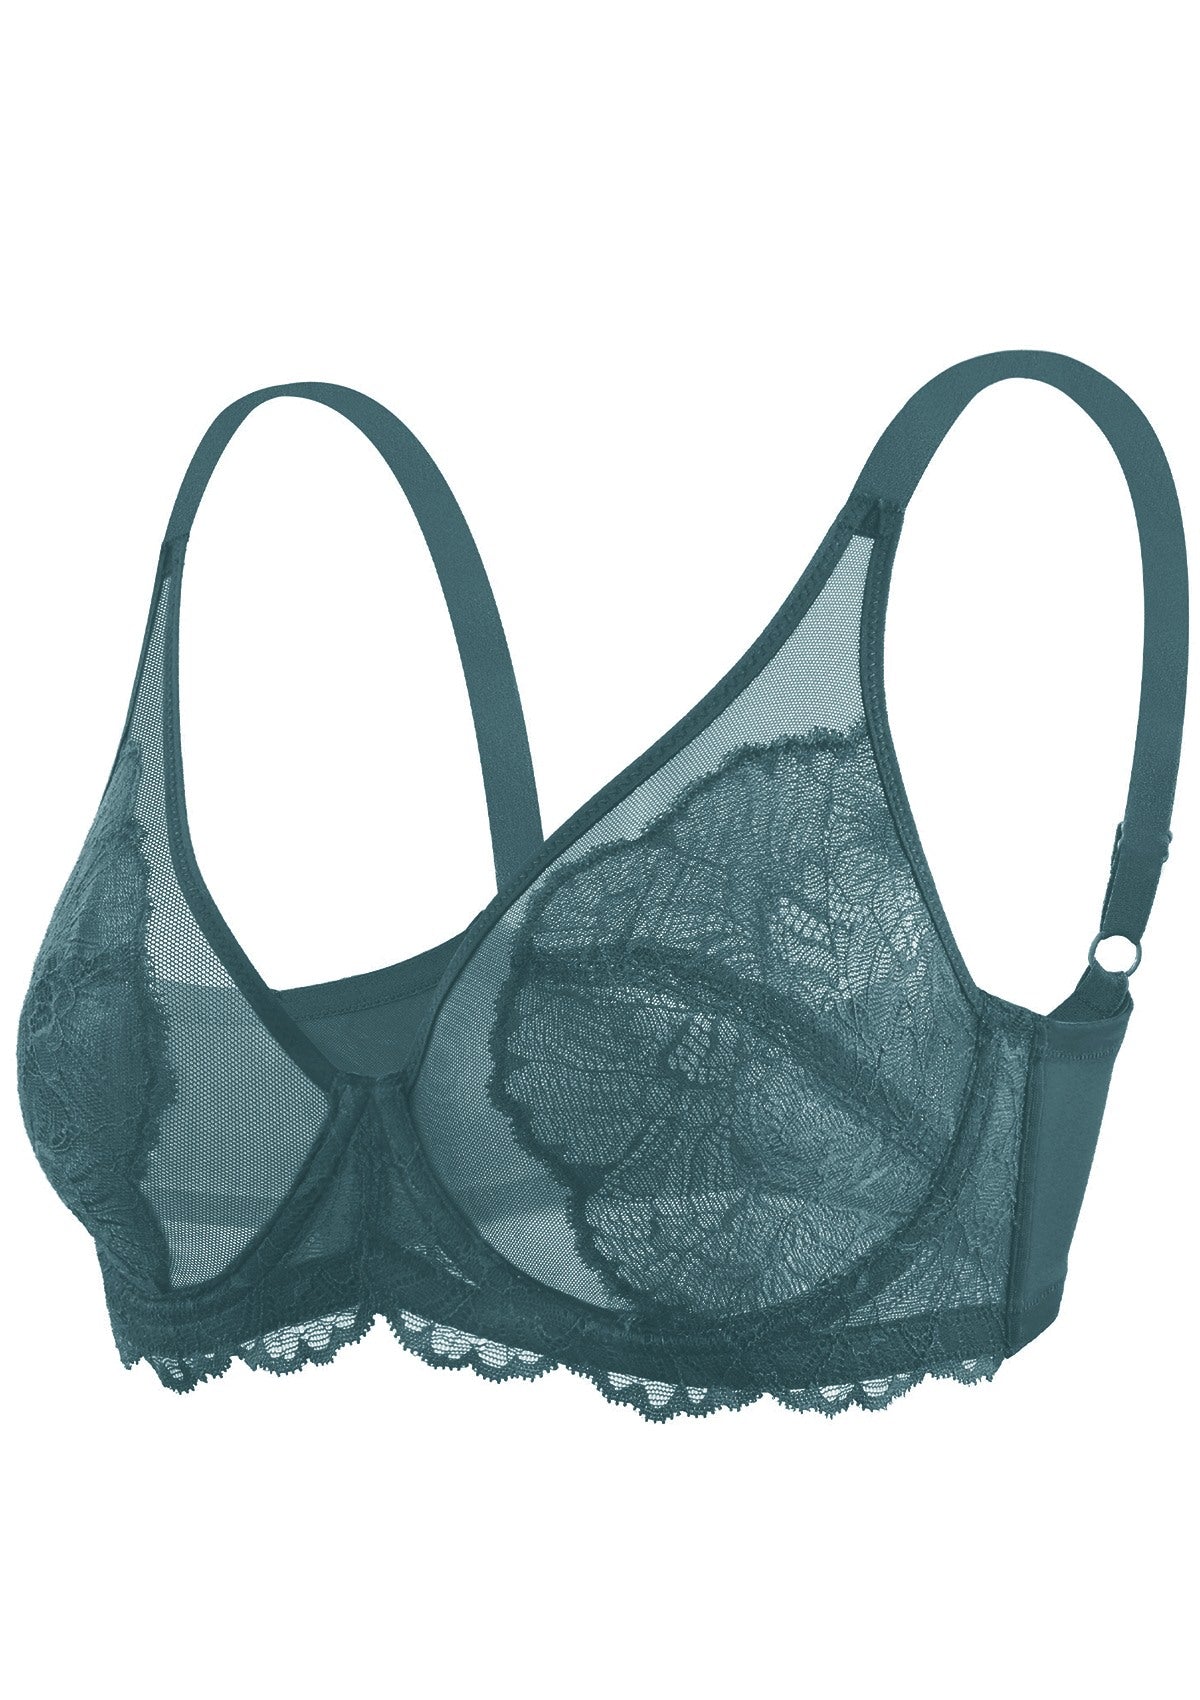 HSIA Blossom Full Figure See-Through Lace Bra For Side And Back Fat - Dark Blue / 36 / C